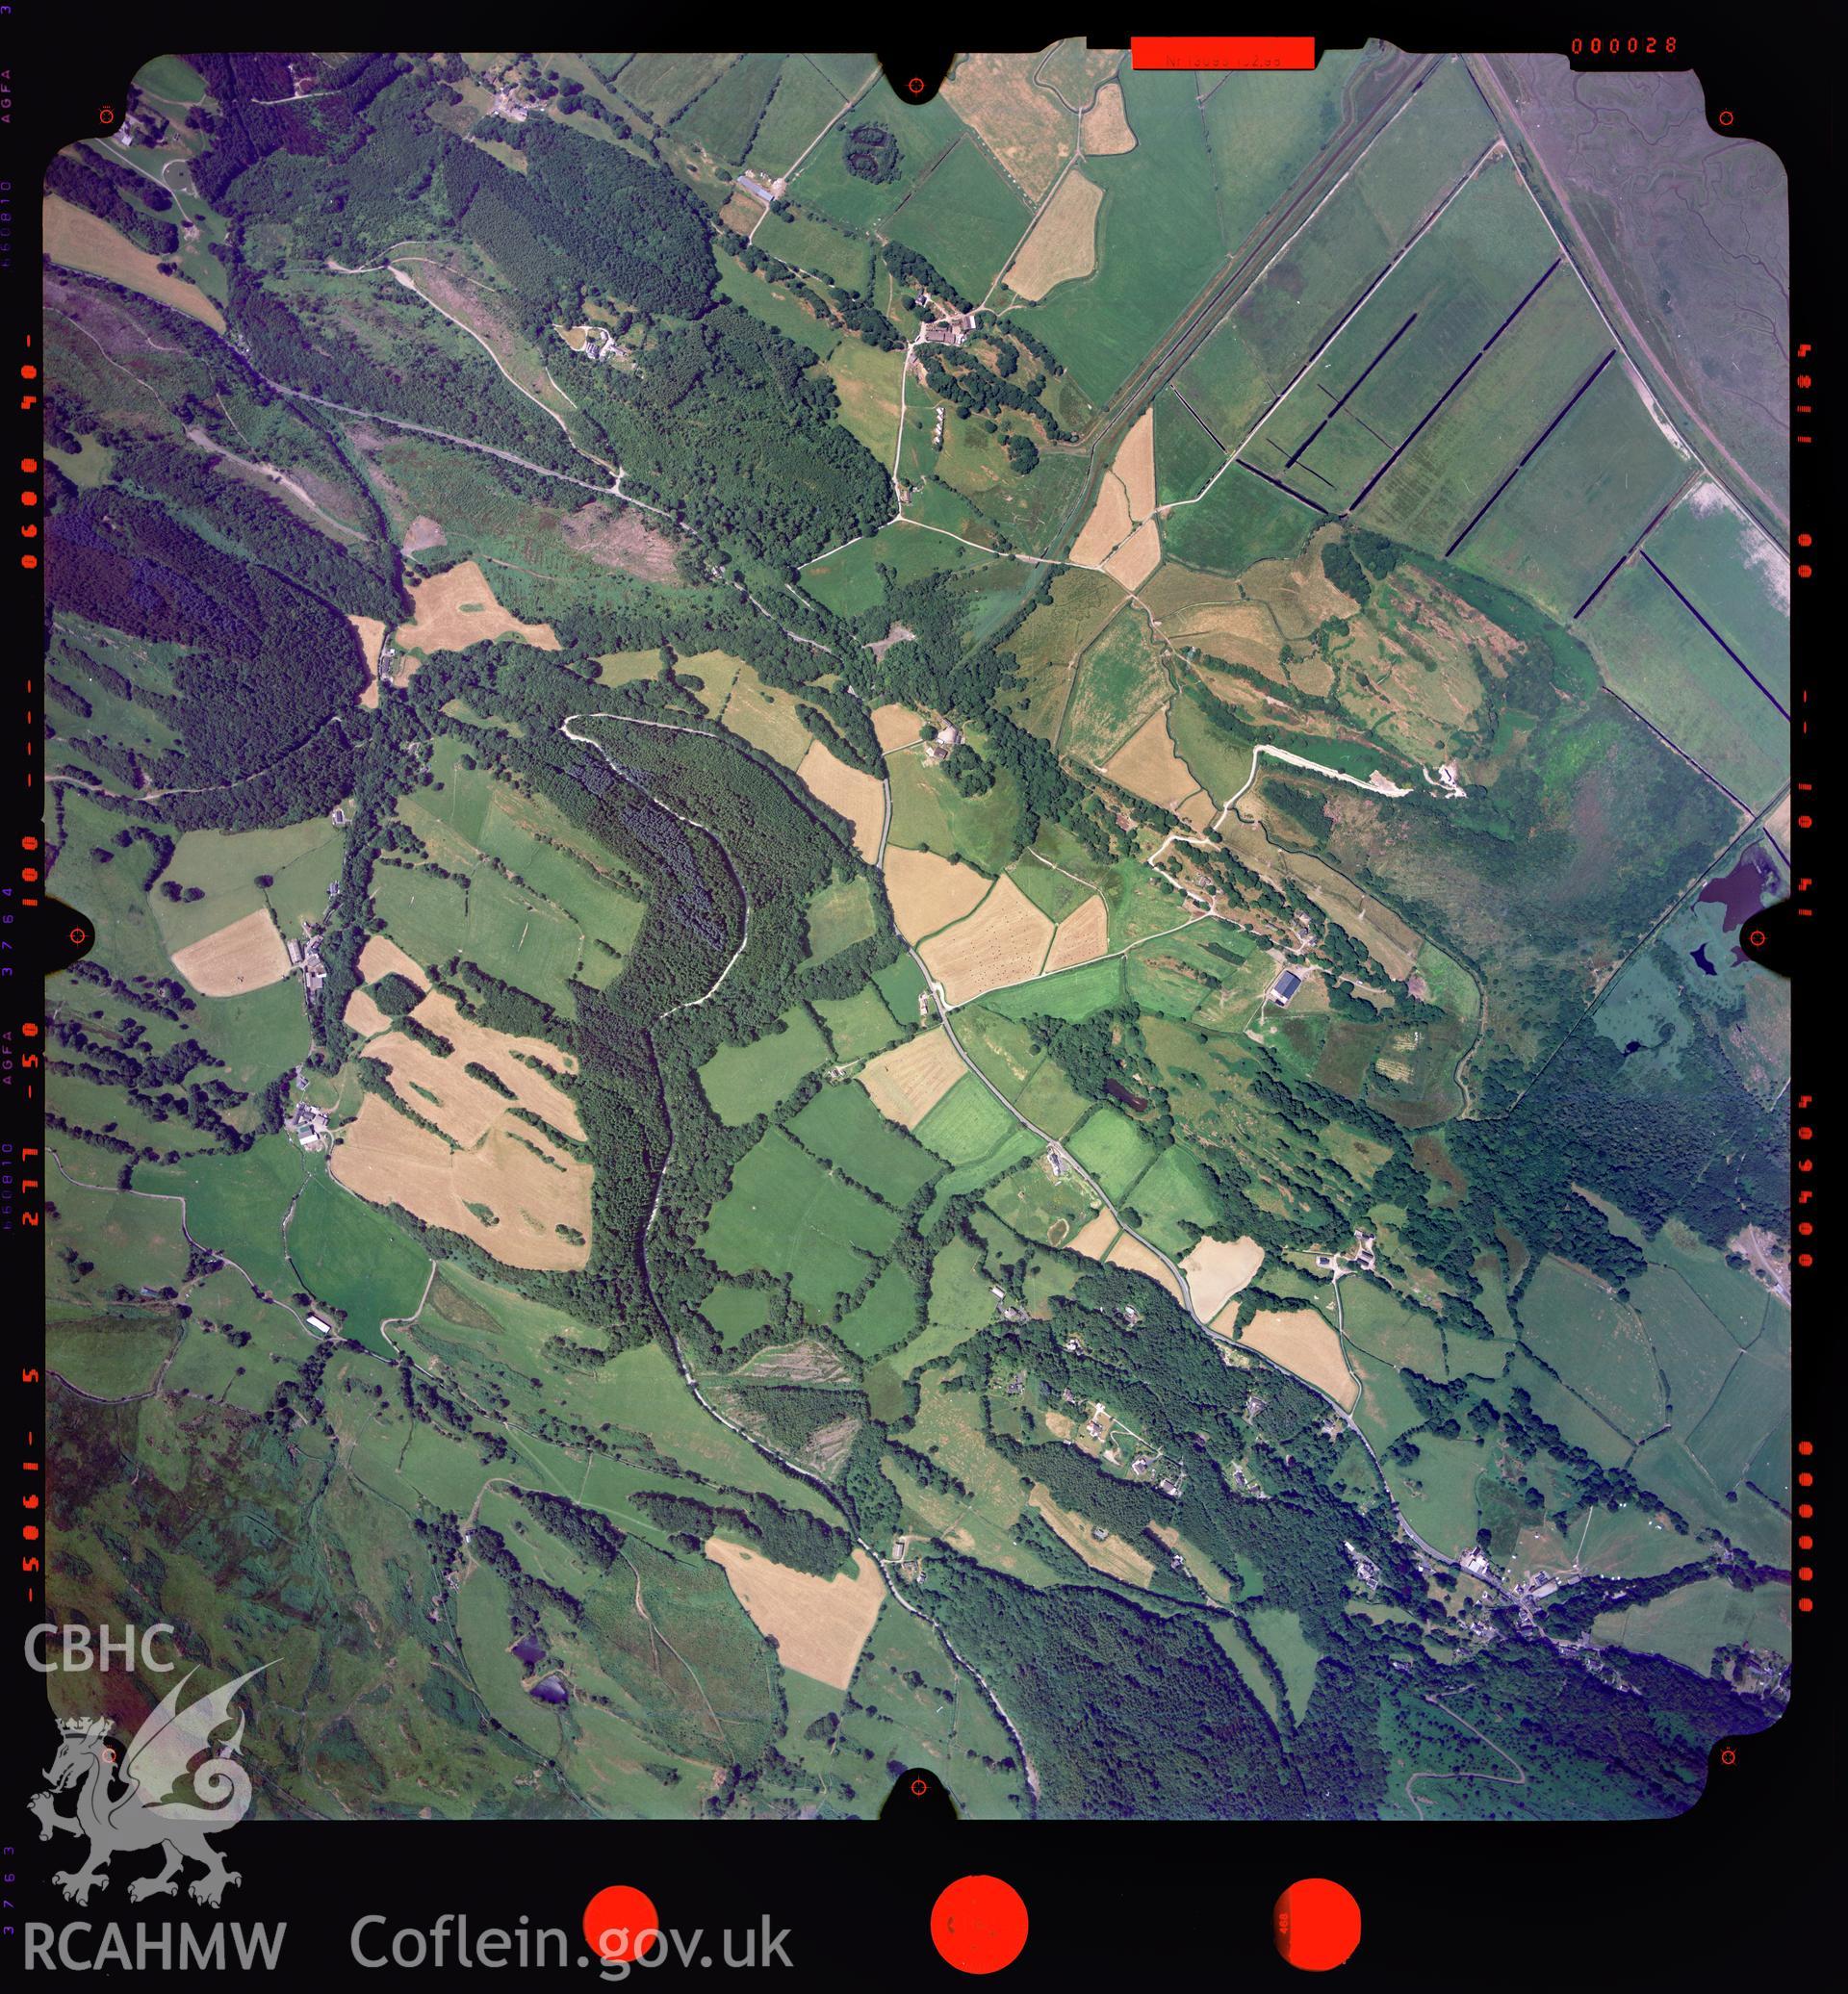 Digitized copy of a colour aerial photograph showing the area around Ysgubor y Coed, Ceredigion, taken by Ordnance Survey, 2003.